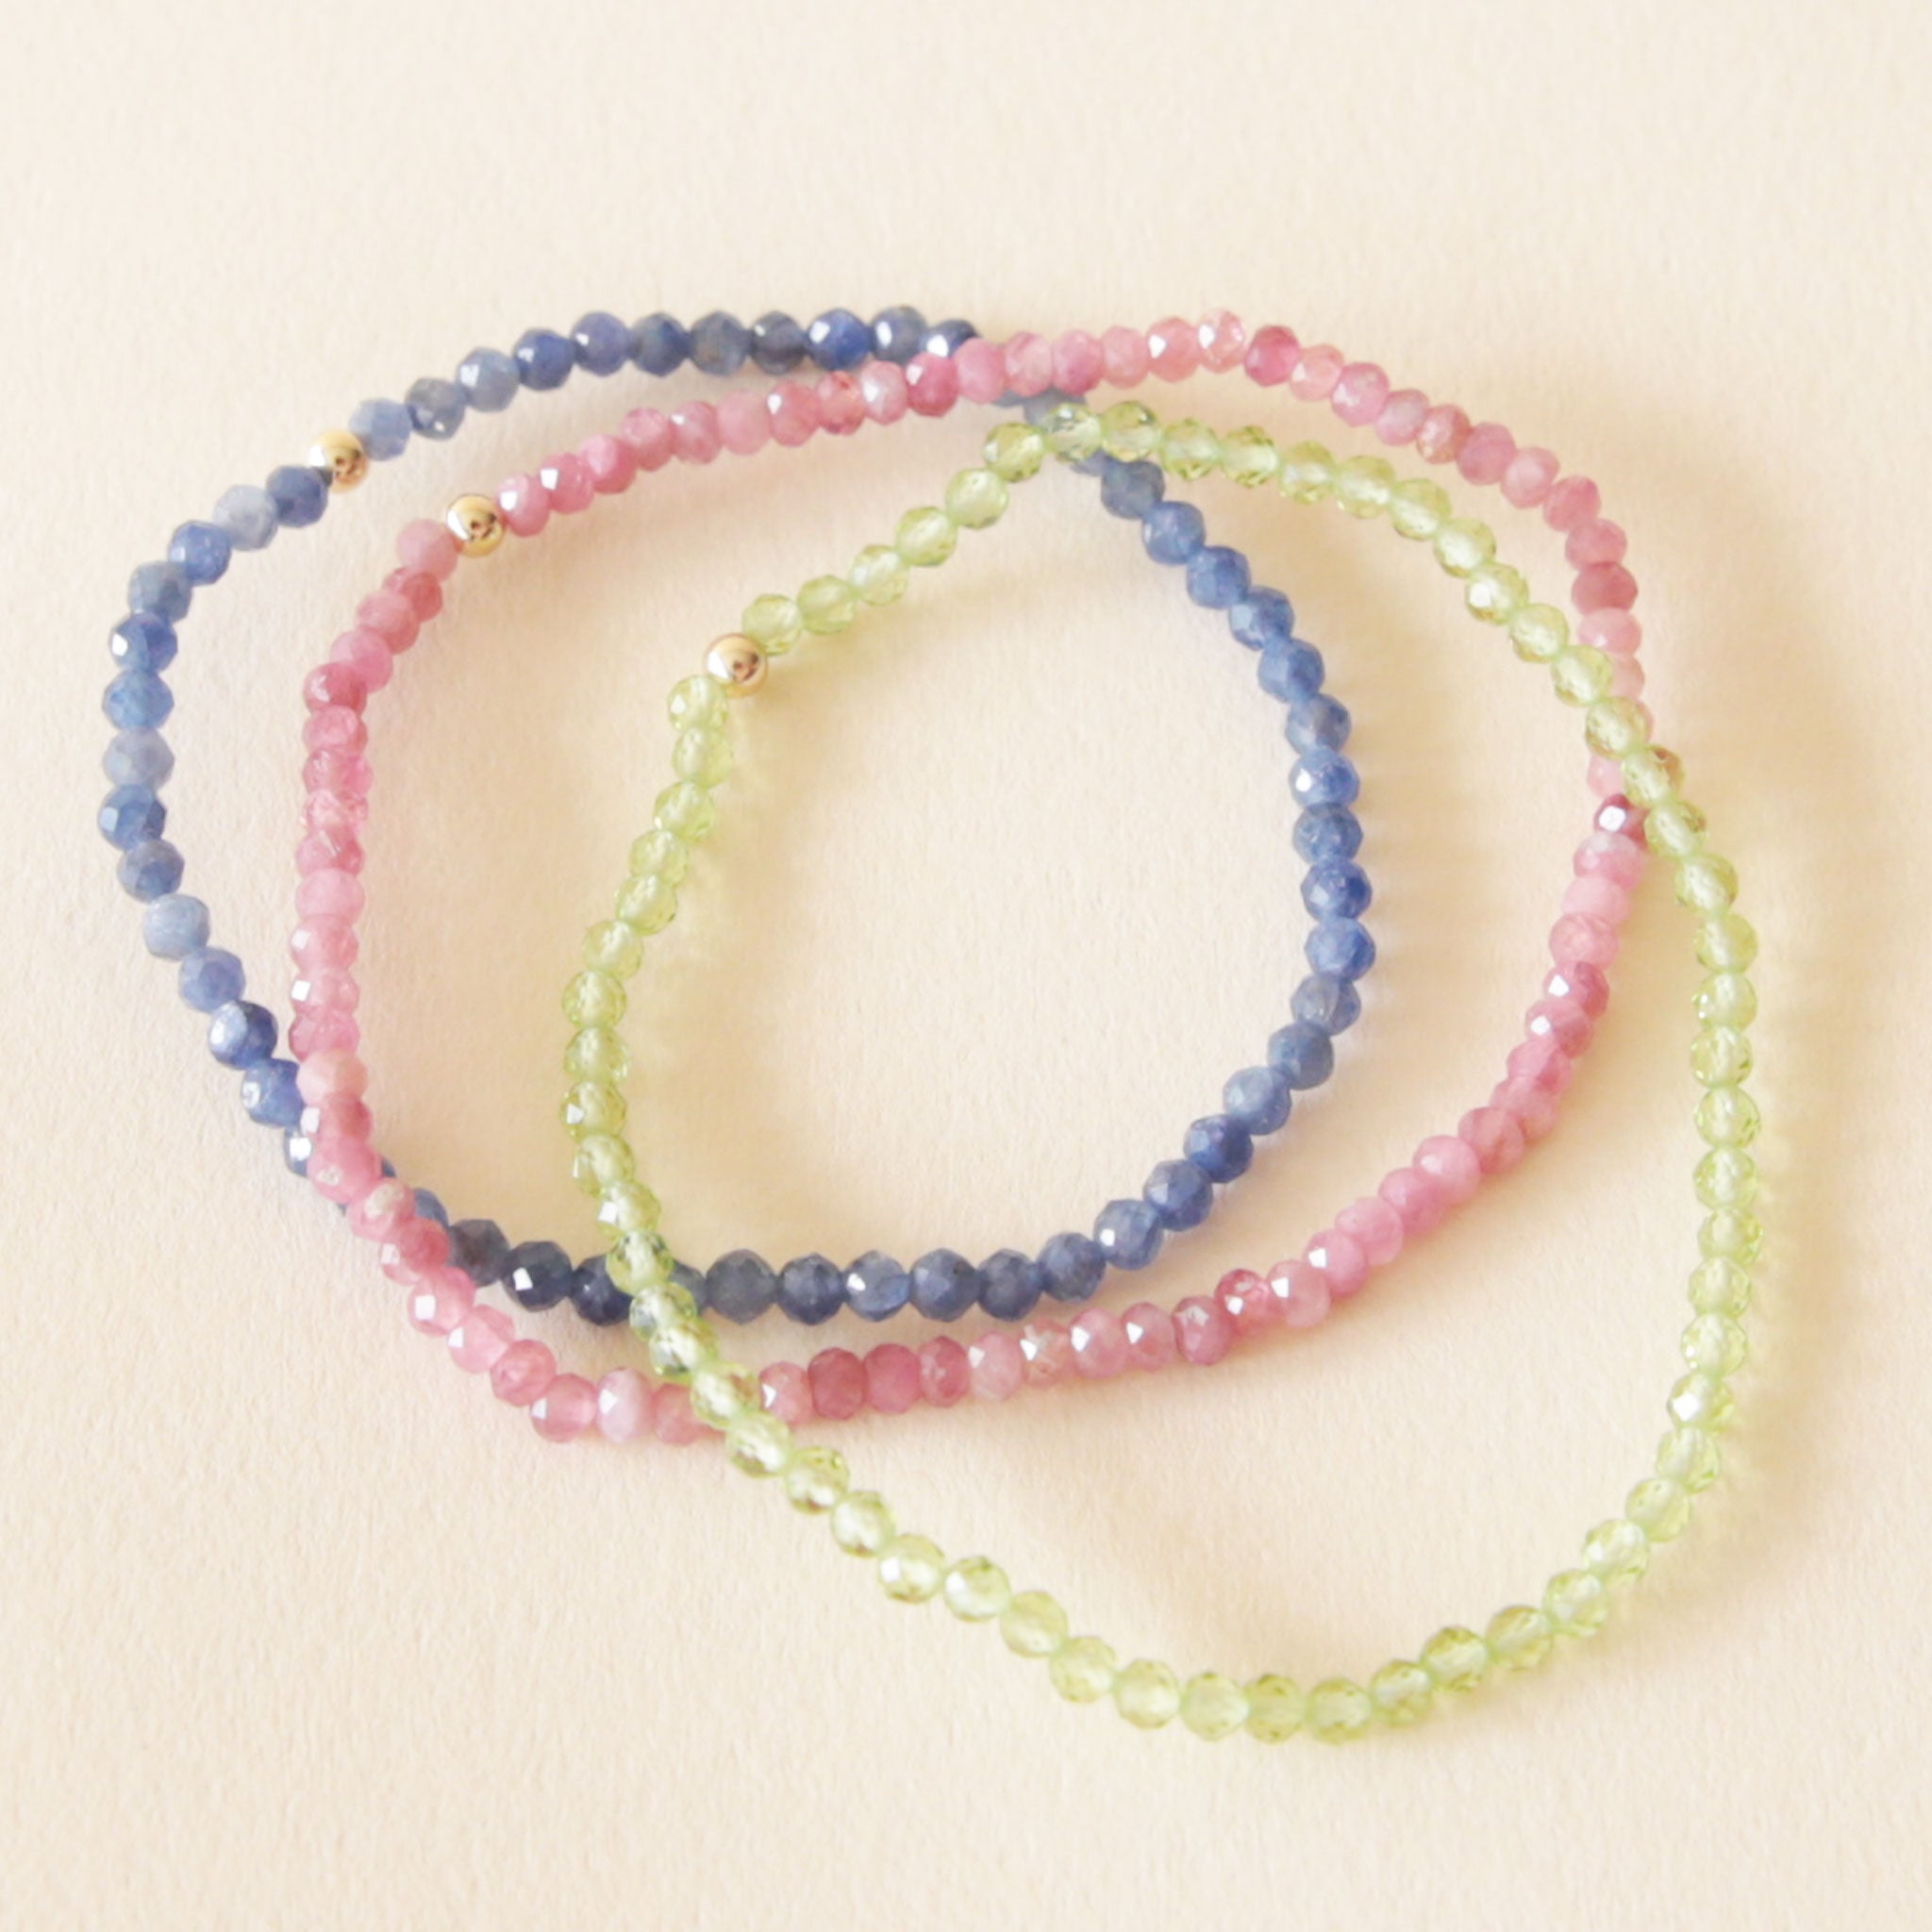 Three different colored bead bracelets on a neutral background. 